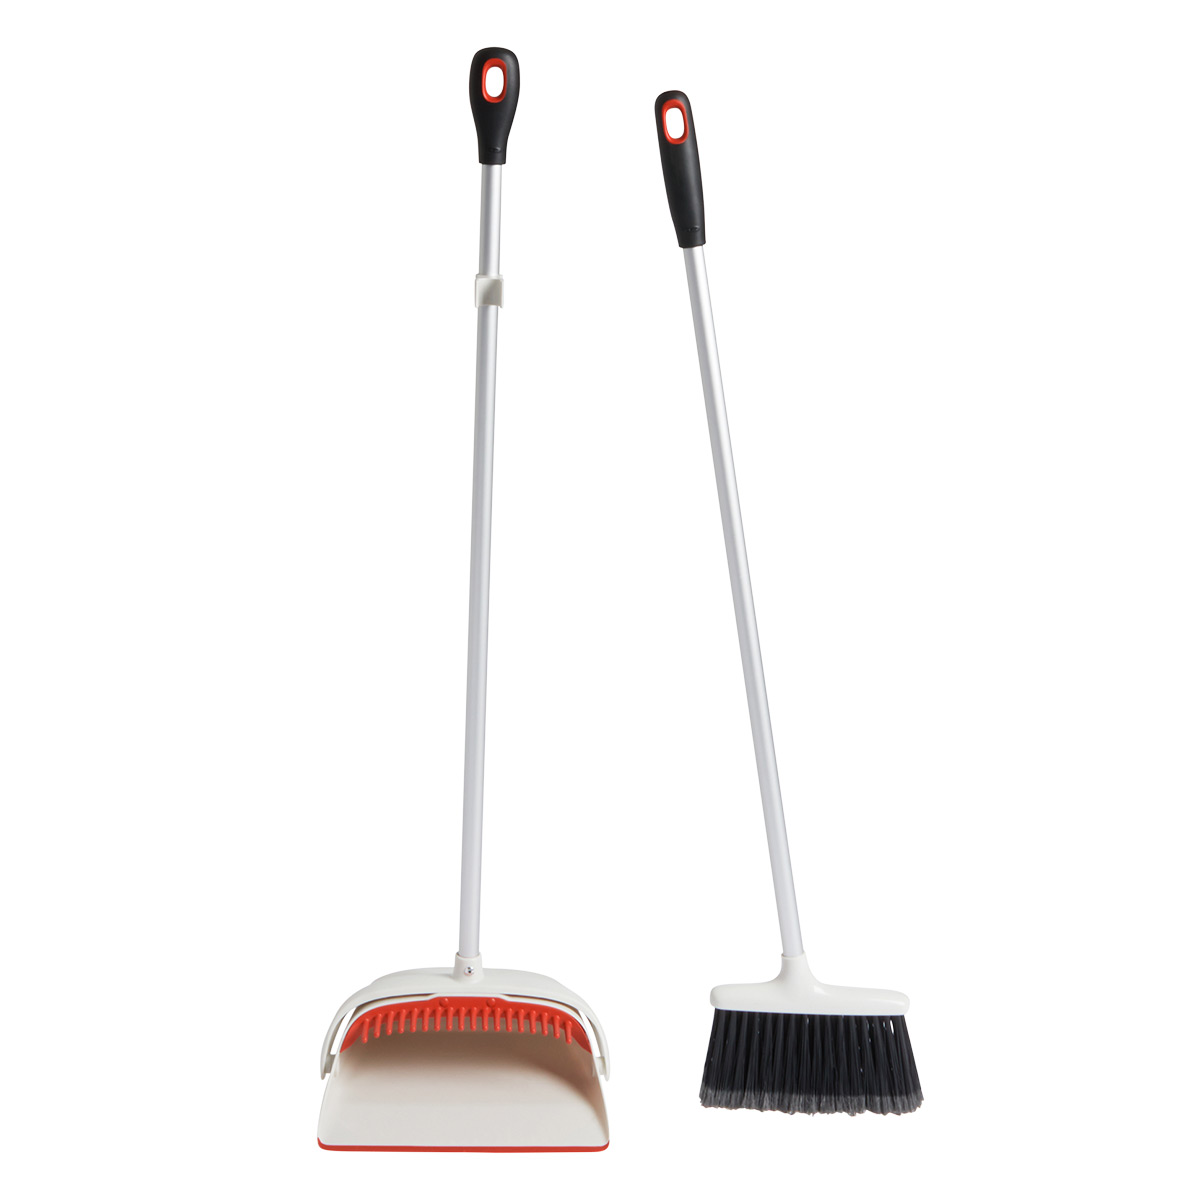 https://www.containerstore.com/catalogimages/386645/10080971-OXO-Upright-Sweep-Set-VEN1.jpg